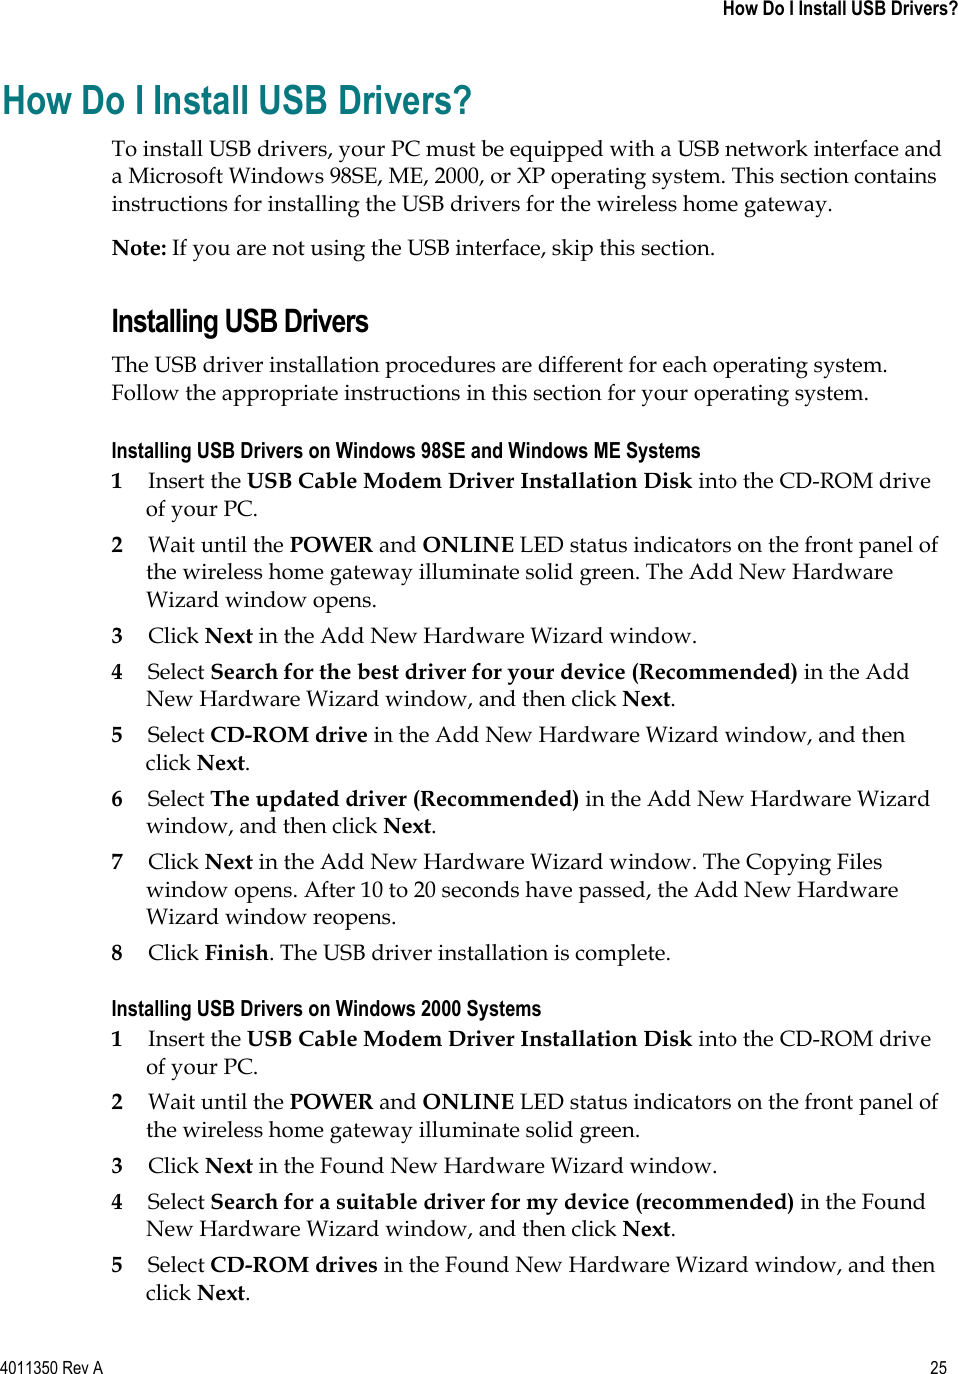 4011350 Rev A    25 How Do I Install USB Drivers?How Do I Install USB Drivers? To install USB drivers, your PC must be equipped with a USB network interface and a Microsoft Windows 98SE, ME, 2000, or XP operating system. This section contains instructions for installing the USB drivers for the wireless home gateway. Note: If you are not using the USB interface, skip this section. Installing USB Drivers The USB driver installation procedures are different for each operating system. Follow the appropriate instructions in this section for your operating system. Installing USB Drivers on Windows 98SE and Windows ME Systems 1Insert the USB Cable Modem Driver Installation Disk into the CD-ROM drive of your PC. 2Wait until the POWER and ONLINE LED status indicators on the front panel of the wireless home gateway illuminate solid green. The Add New Hardware Wizard window opens. 3Click Next in the Add New Hardware Wizard window. 4Select Search for the best driver for your device (Recommended) in the Add New Hardware Wizard window, and then click Next.5Select CD-ROM drive in the Add New Hardware Wizard window, and then click Next.6Select The updated driver (Recommended) in the Add New Hardware Wizard window, and then click Next.7Click Next in the Add New Hardware Wizard window. The Copying Files window opens. After 10 to 20 seconds have passed, the Add New Hardware Wizard window reopens. 8Click Finish. The USB driver installation is complete. Installing USB Drivers on Windows 2000 Systems 1Insert the USB Cable Modem Driver Installation Disk into the CD-ROM drive of your PC. 2Wait until the POWER and ONLINE LED status indicators on the front panel of the wireless home gateway illuminate solid green. 3Click Next in the Found New Hardware Wizard window. 4Select Search for a suitable driver for my device (recommended) in the Found New Hardware Wizard window, and then click Next.5Select CD-ROM drives in the Found New Hardware Wizard window, and then click Next.